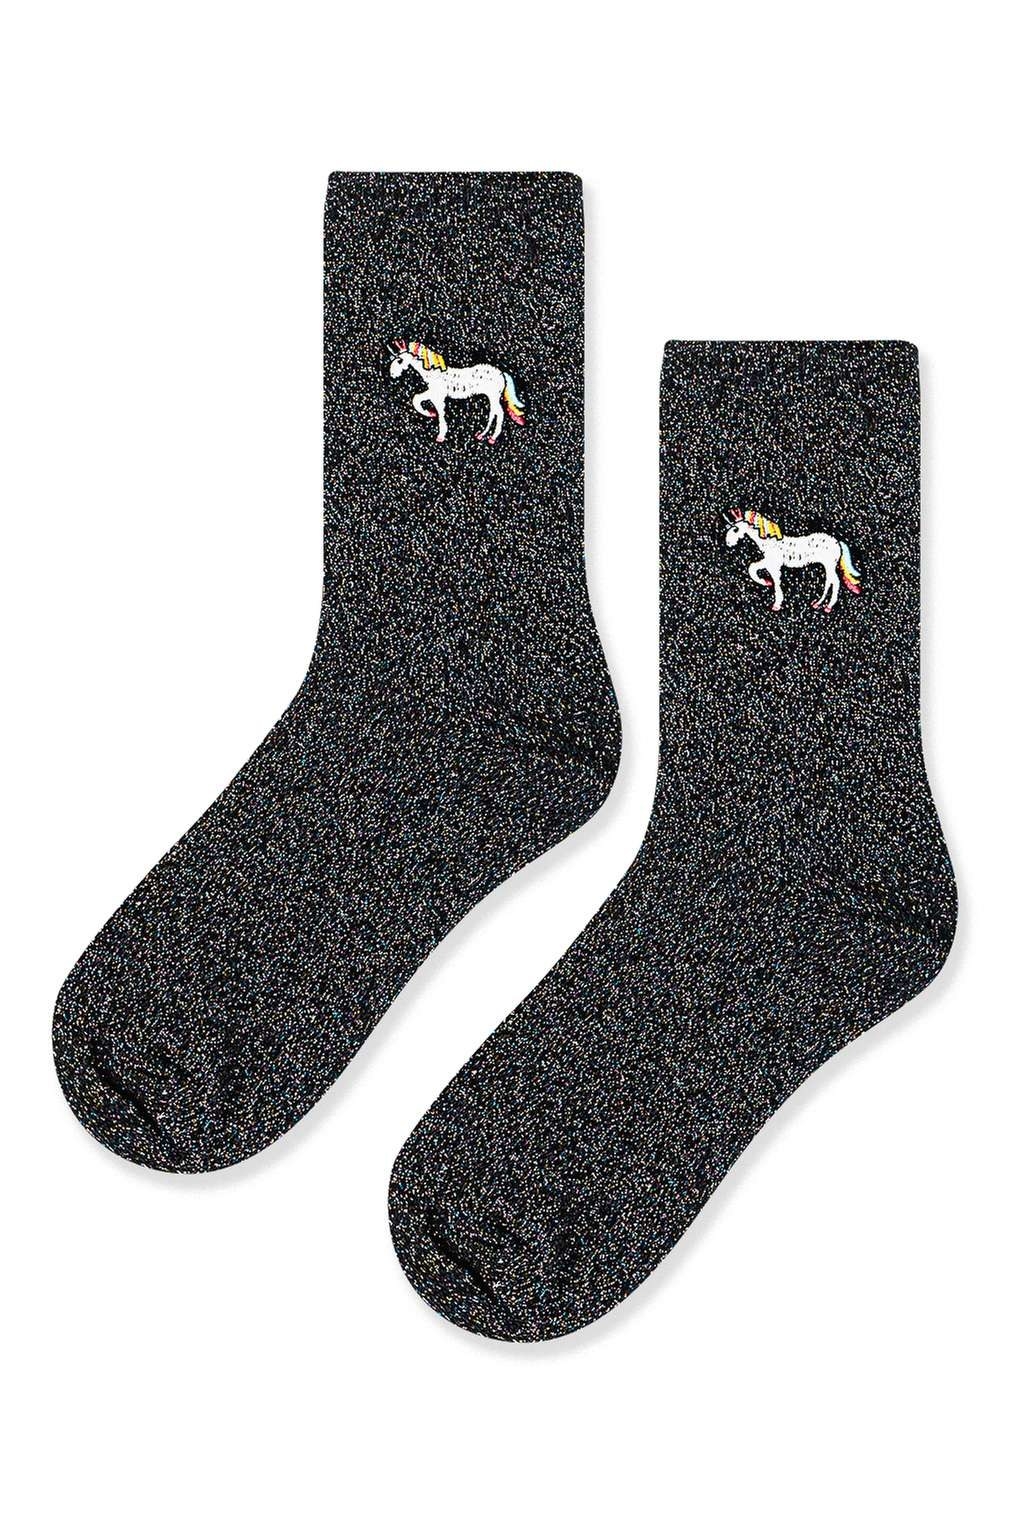 31 Socks Everyone With Cold Feet Needs To Buy ASAP